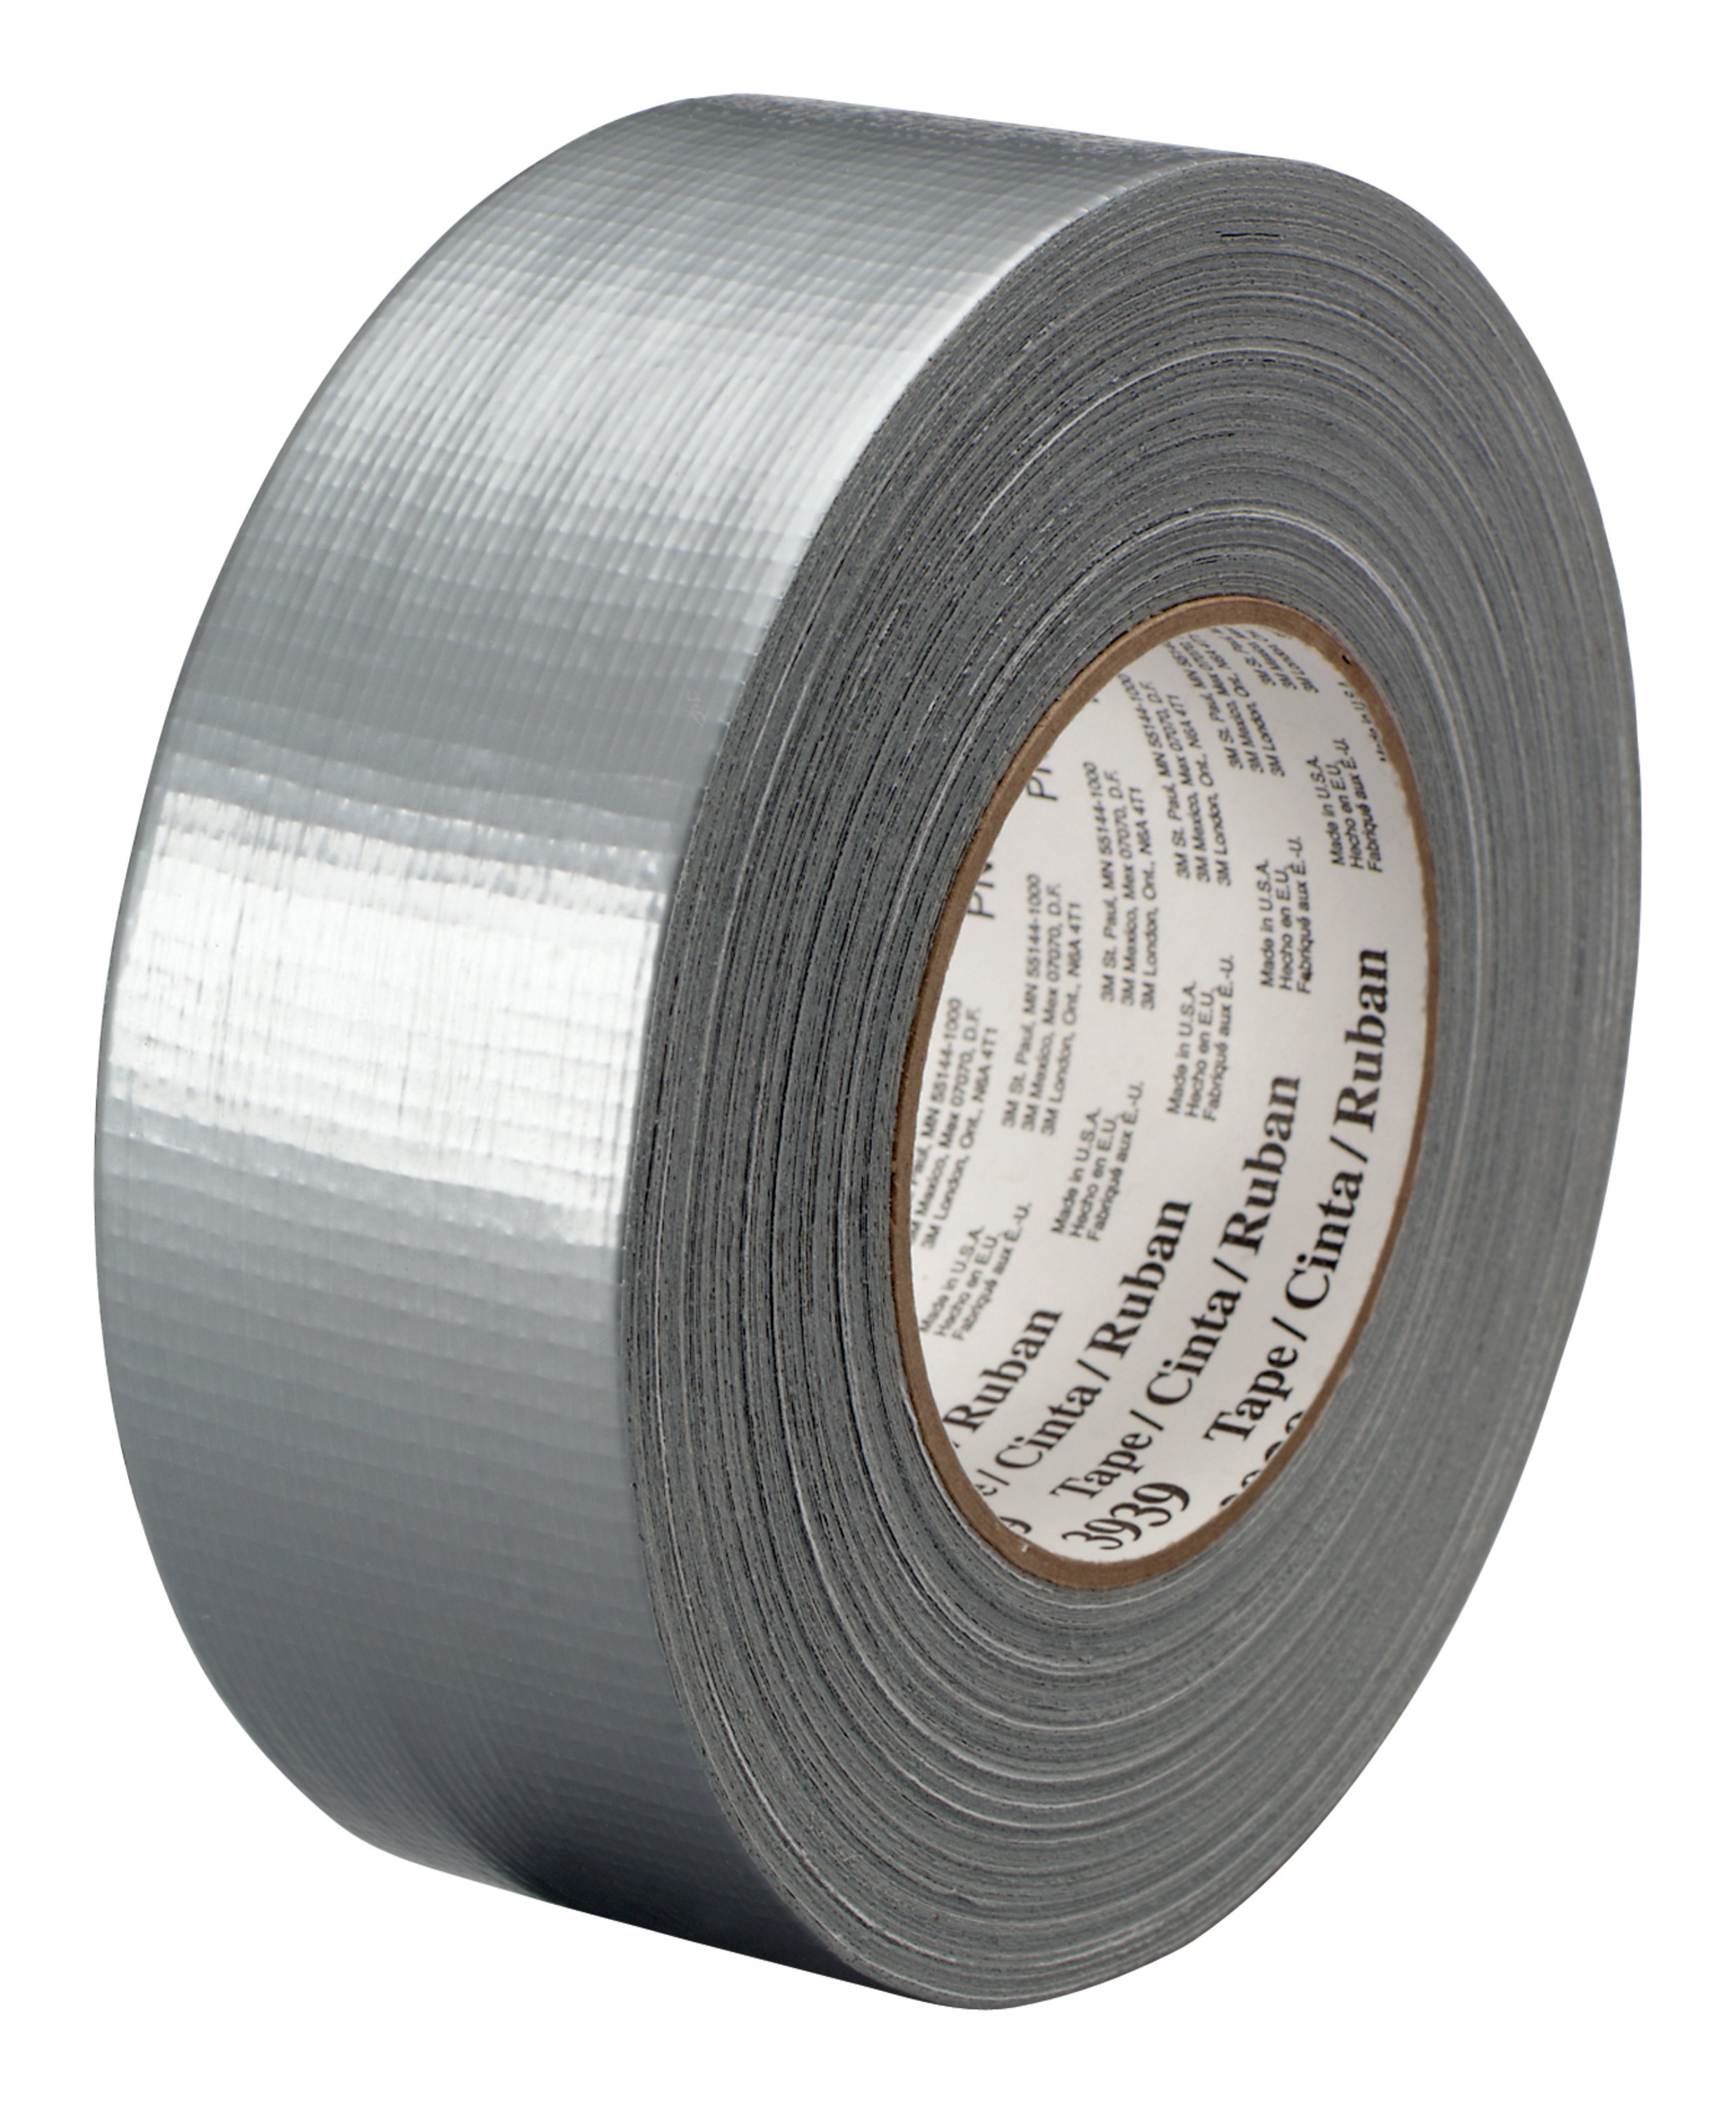 3M™ Heavy Duty Duct Tape 3939 has a unique construction that allows for permanent and temporary applications.